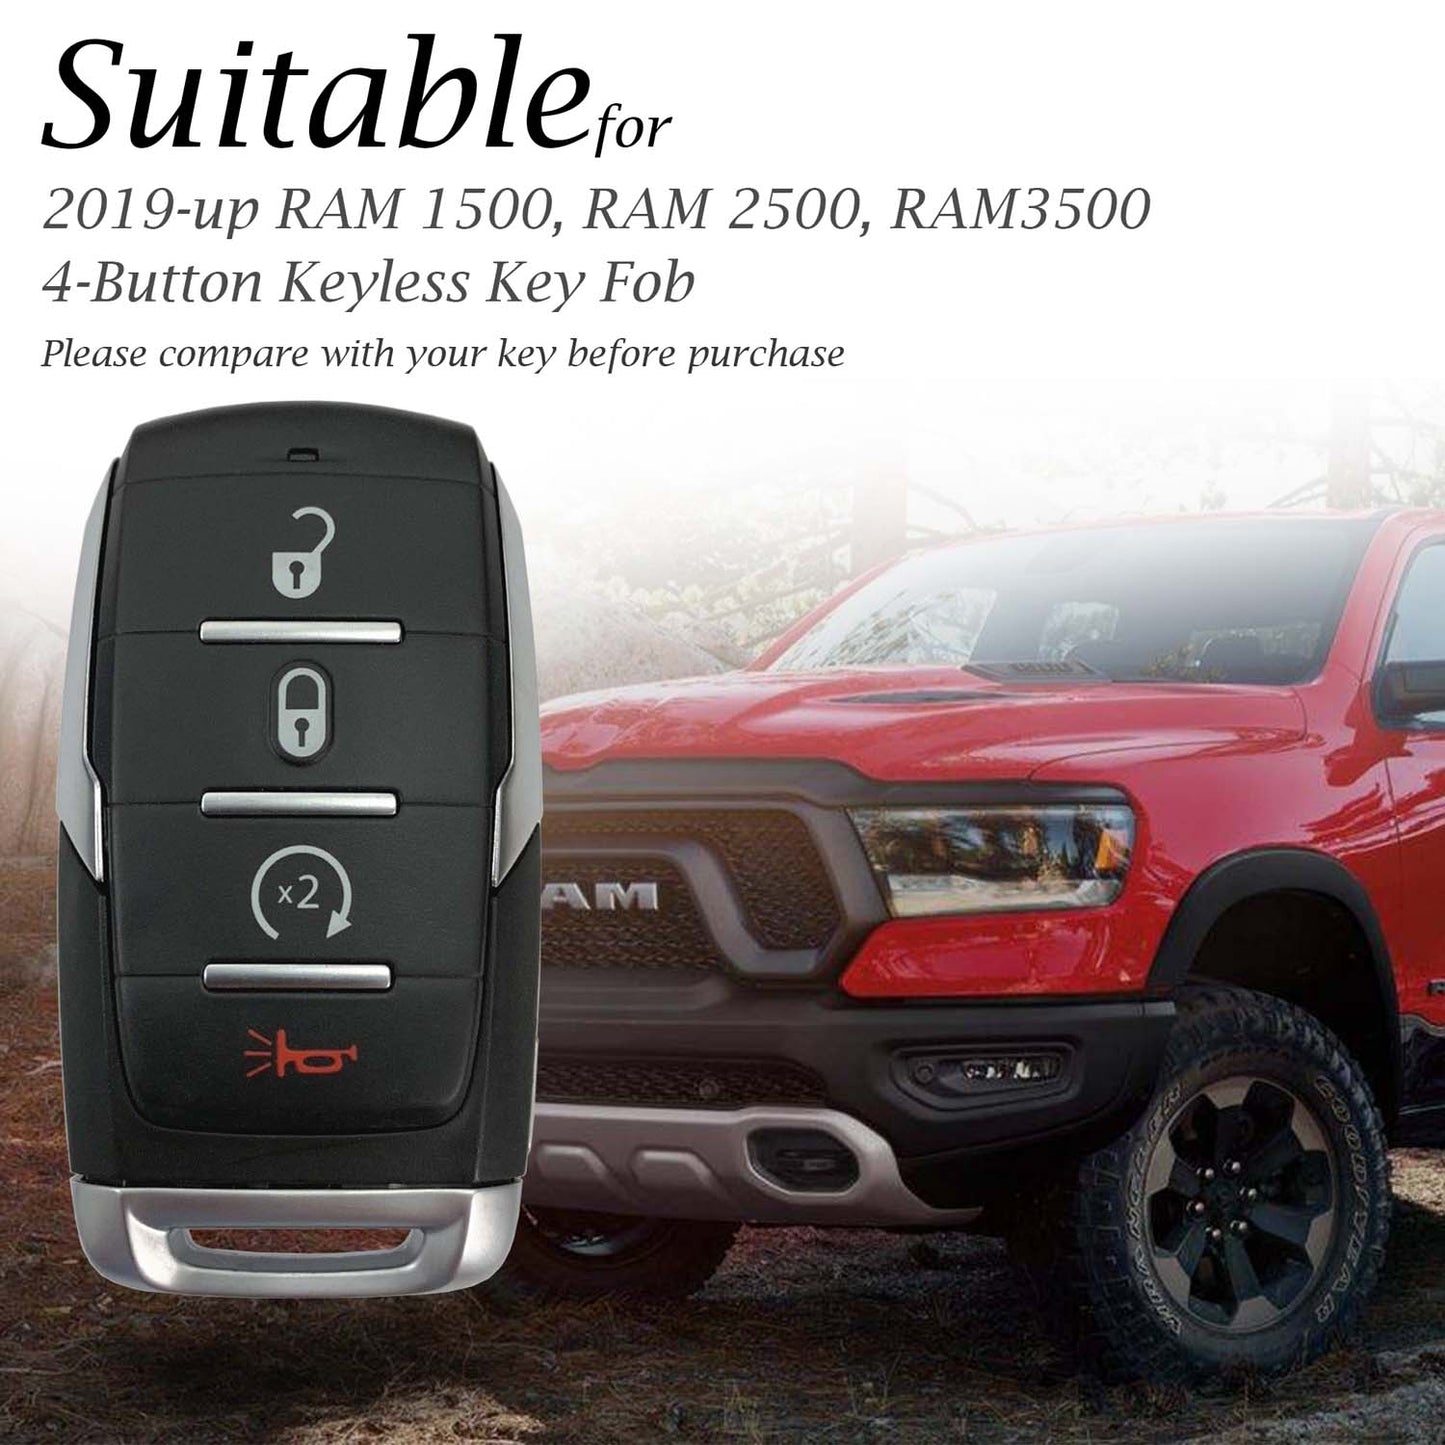 Vitodeco 4-Button Genuine Leather Smart Key Fob Case Cover Protector Compatible with RAM 1500, RAM 2500, RAM 3500 2019 - 2024